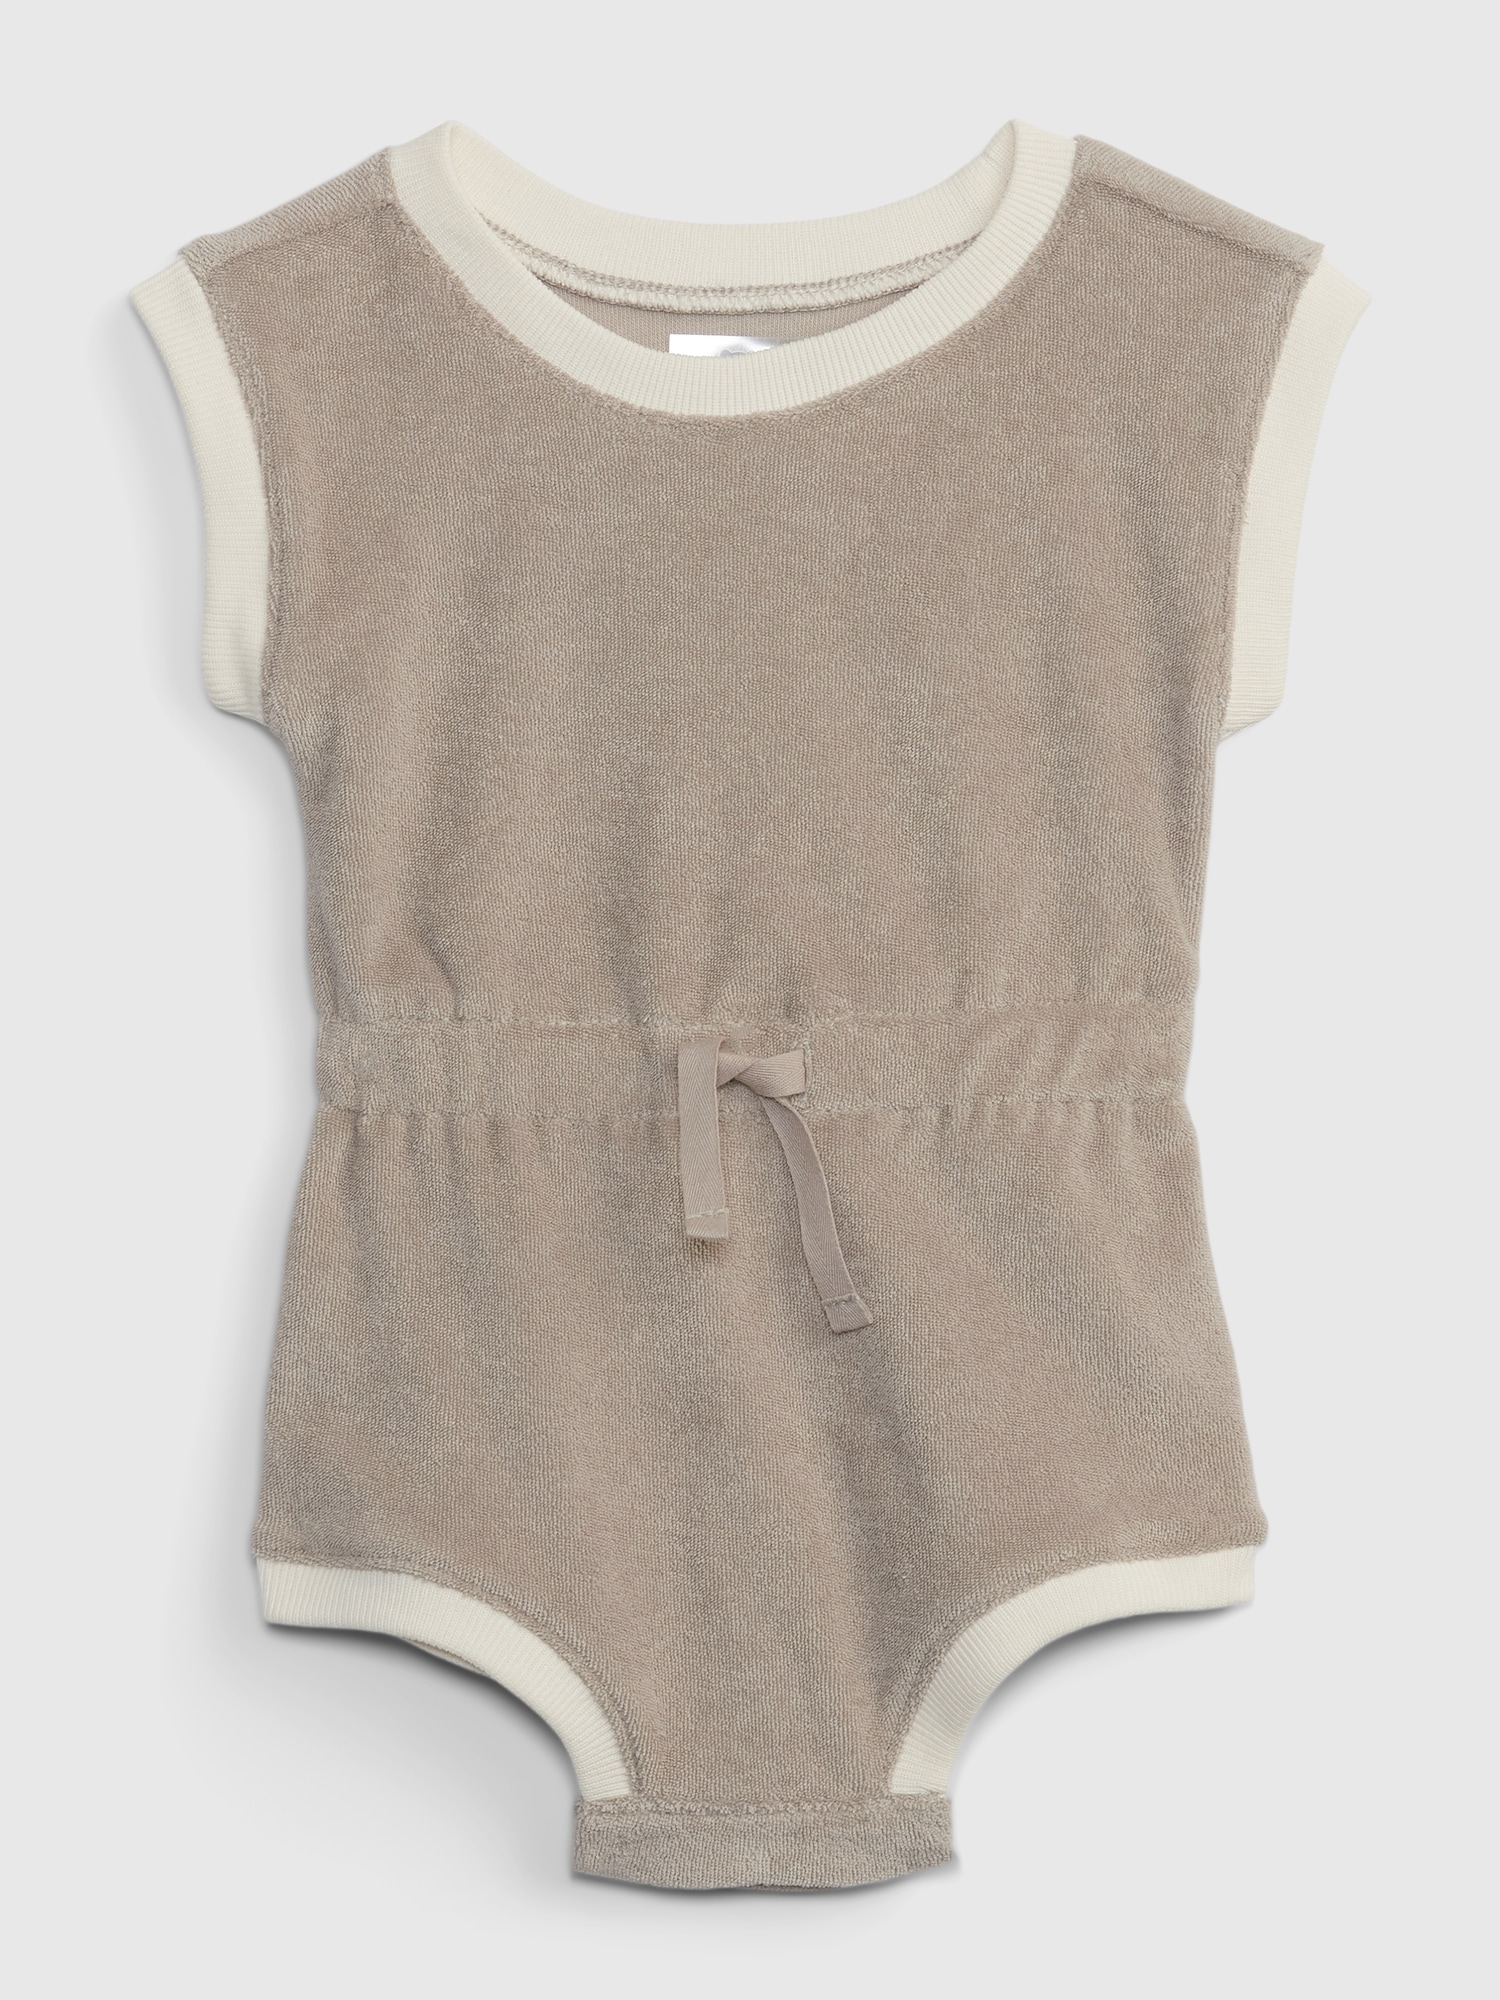 Gap Baby Towel Terry Shorty One-piece In Quail Brown